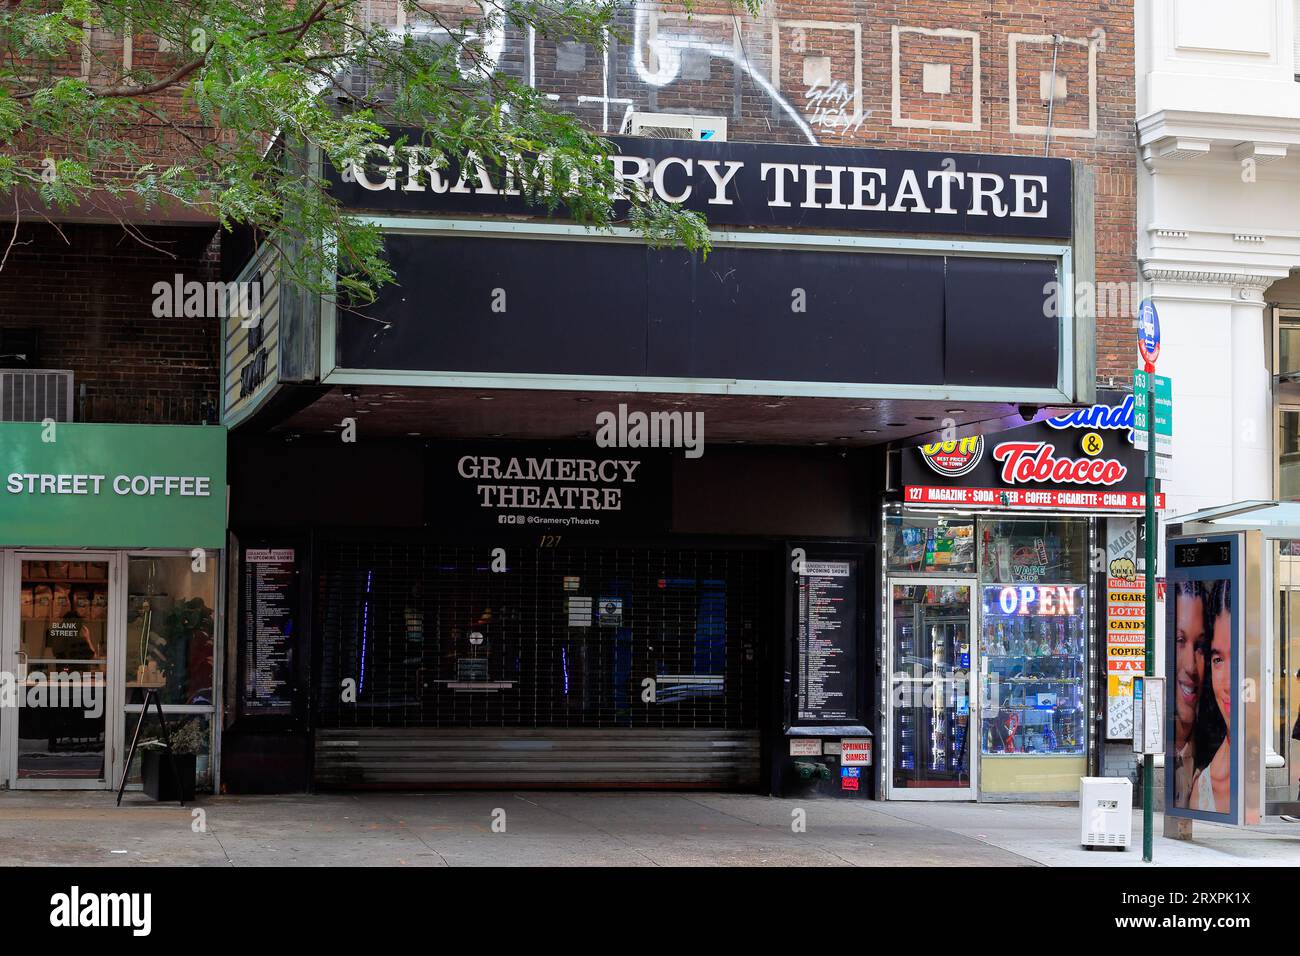 Gramercy Theatre, 127 E 23rd St, New York. NYC storefront photo of a music venue in Manhattan's Gramercy neighborhood. Stock Photo